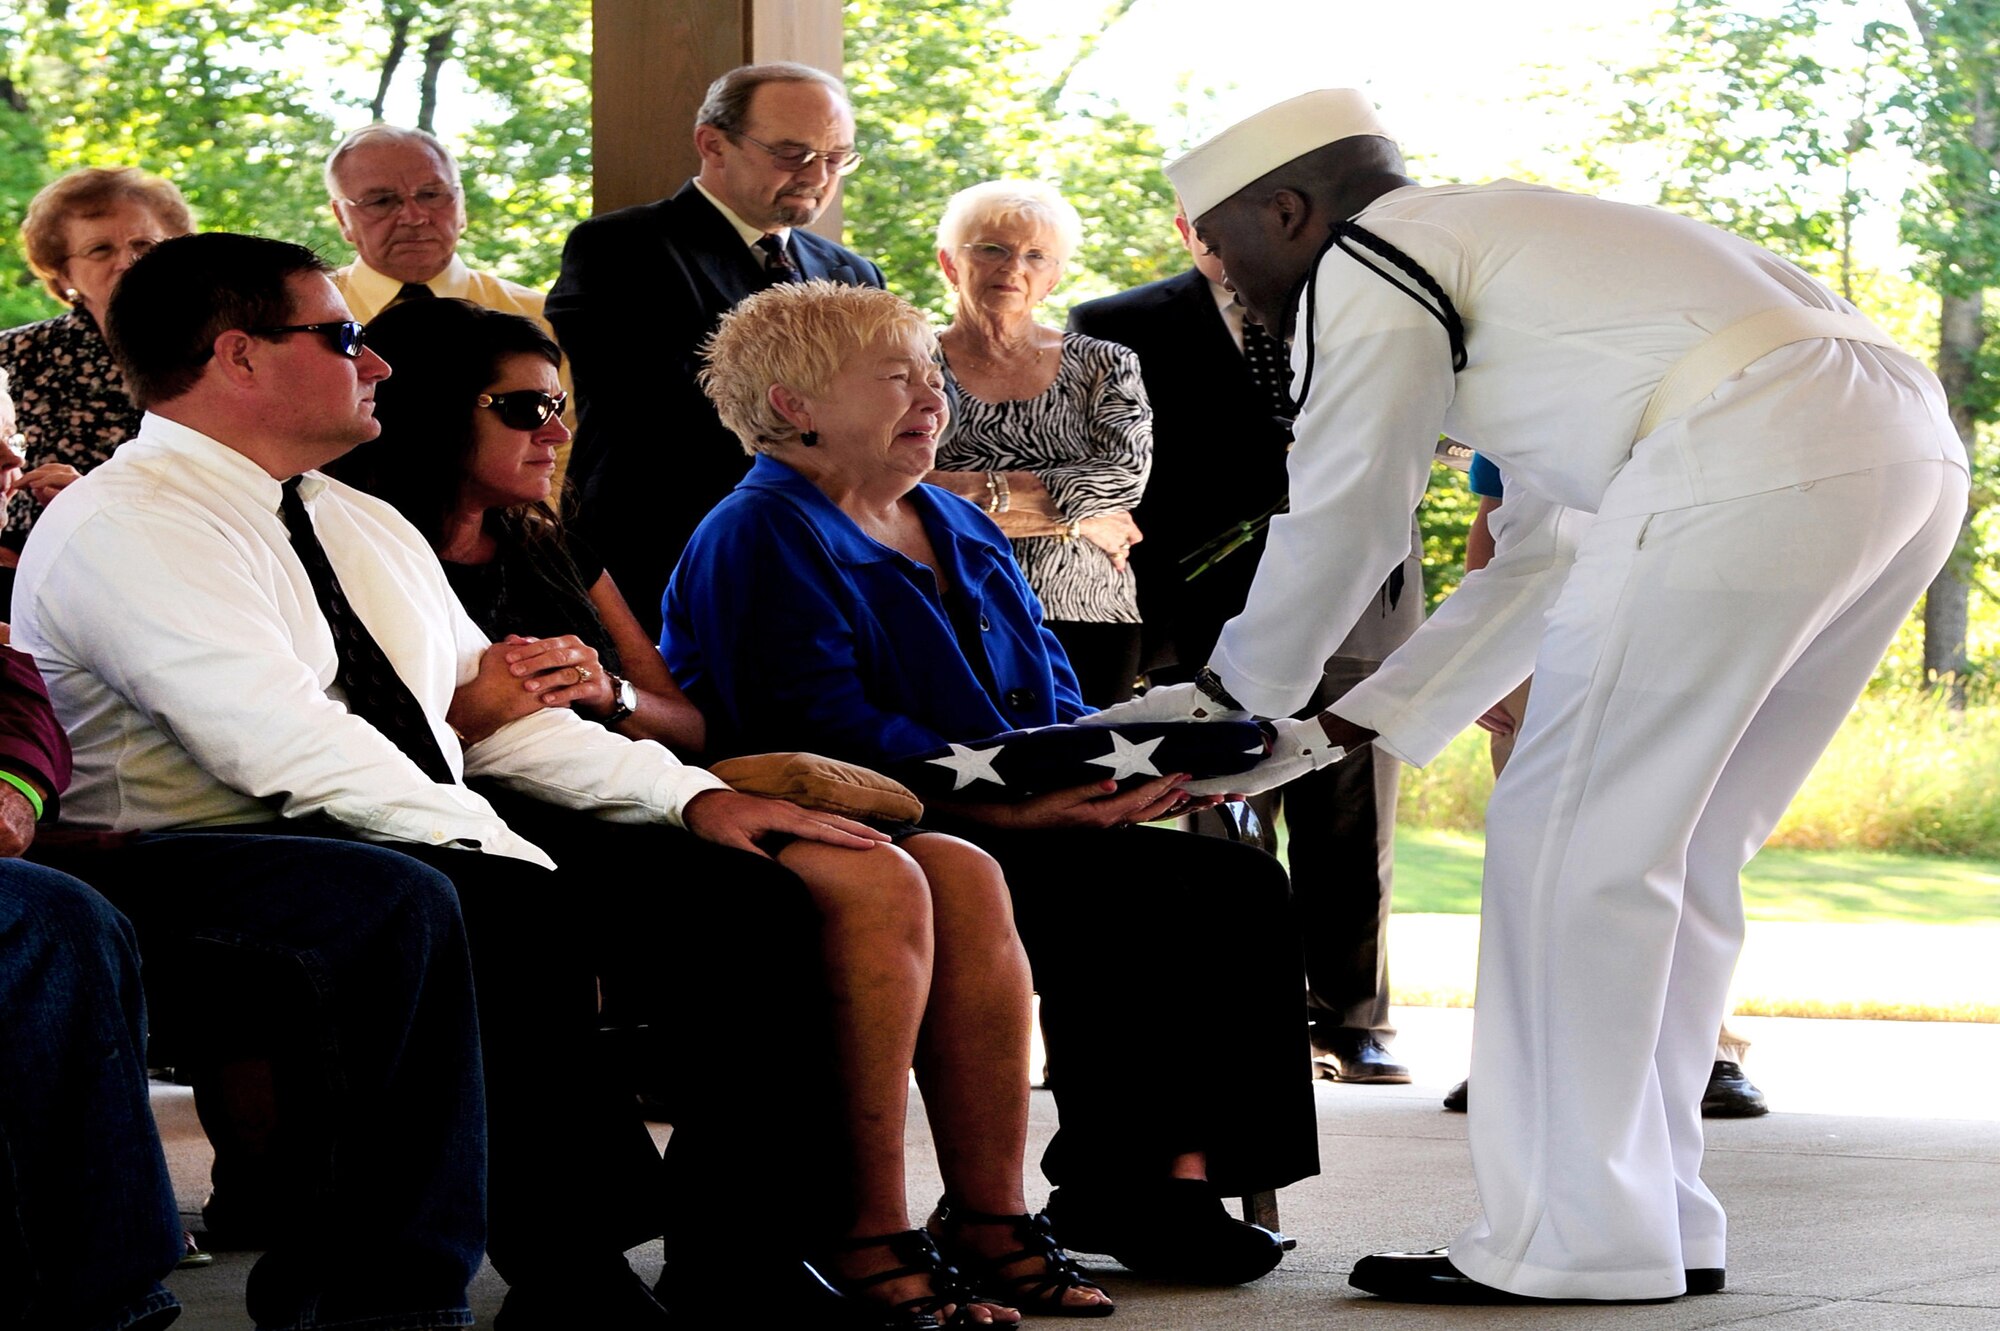 U.S. Navy Petty Officer 3rd Class, Ron Carter, presents a folded U.S. flag to the wife of Solon Merritt  in honor of her and her husband's service during a joint funeral service held Aug. 22, 2012 at the Alabama National Cemetary near Birmingham Ala. Airmen from the Maxwell Air Force Base Honor Guard joined the seaman to offer respects during the ceremony. (U.S. Air Force photo by Master Sgt. Michael Voss)